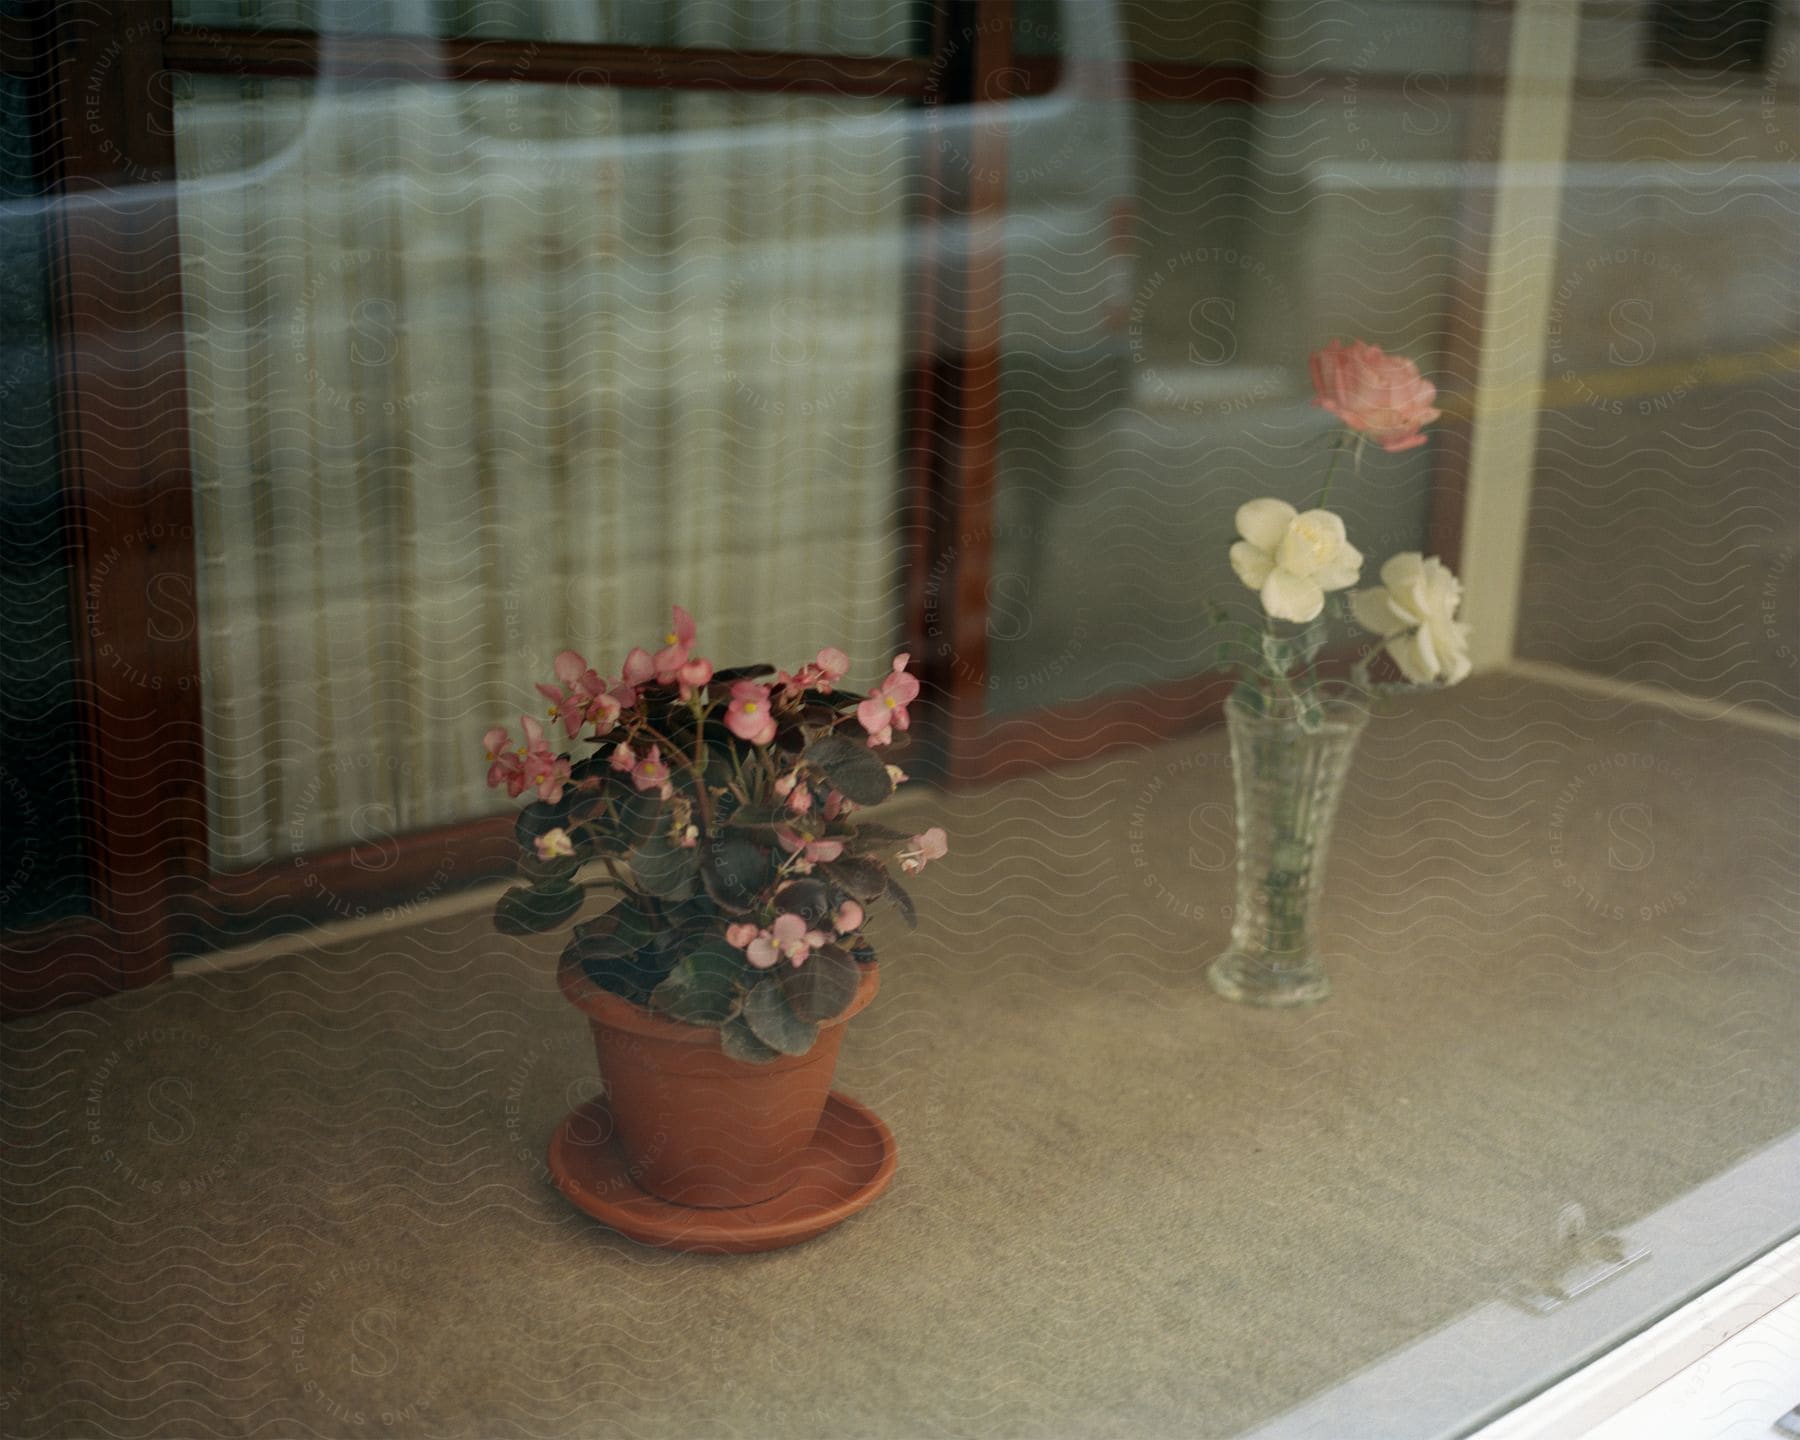 Two flowers sitting on a table in a window.